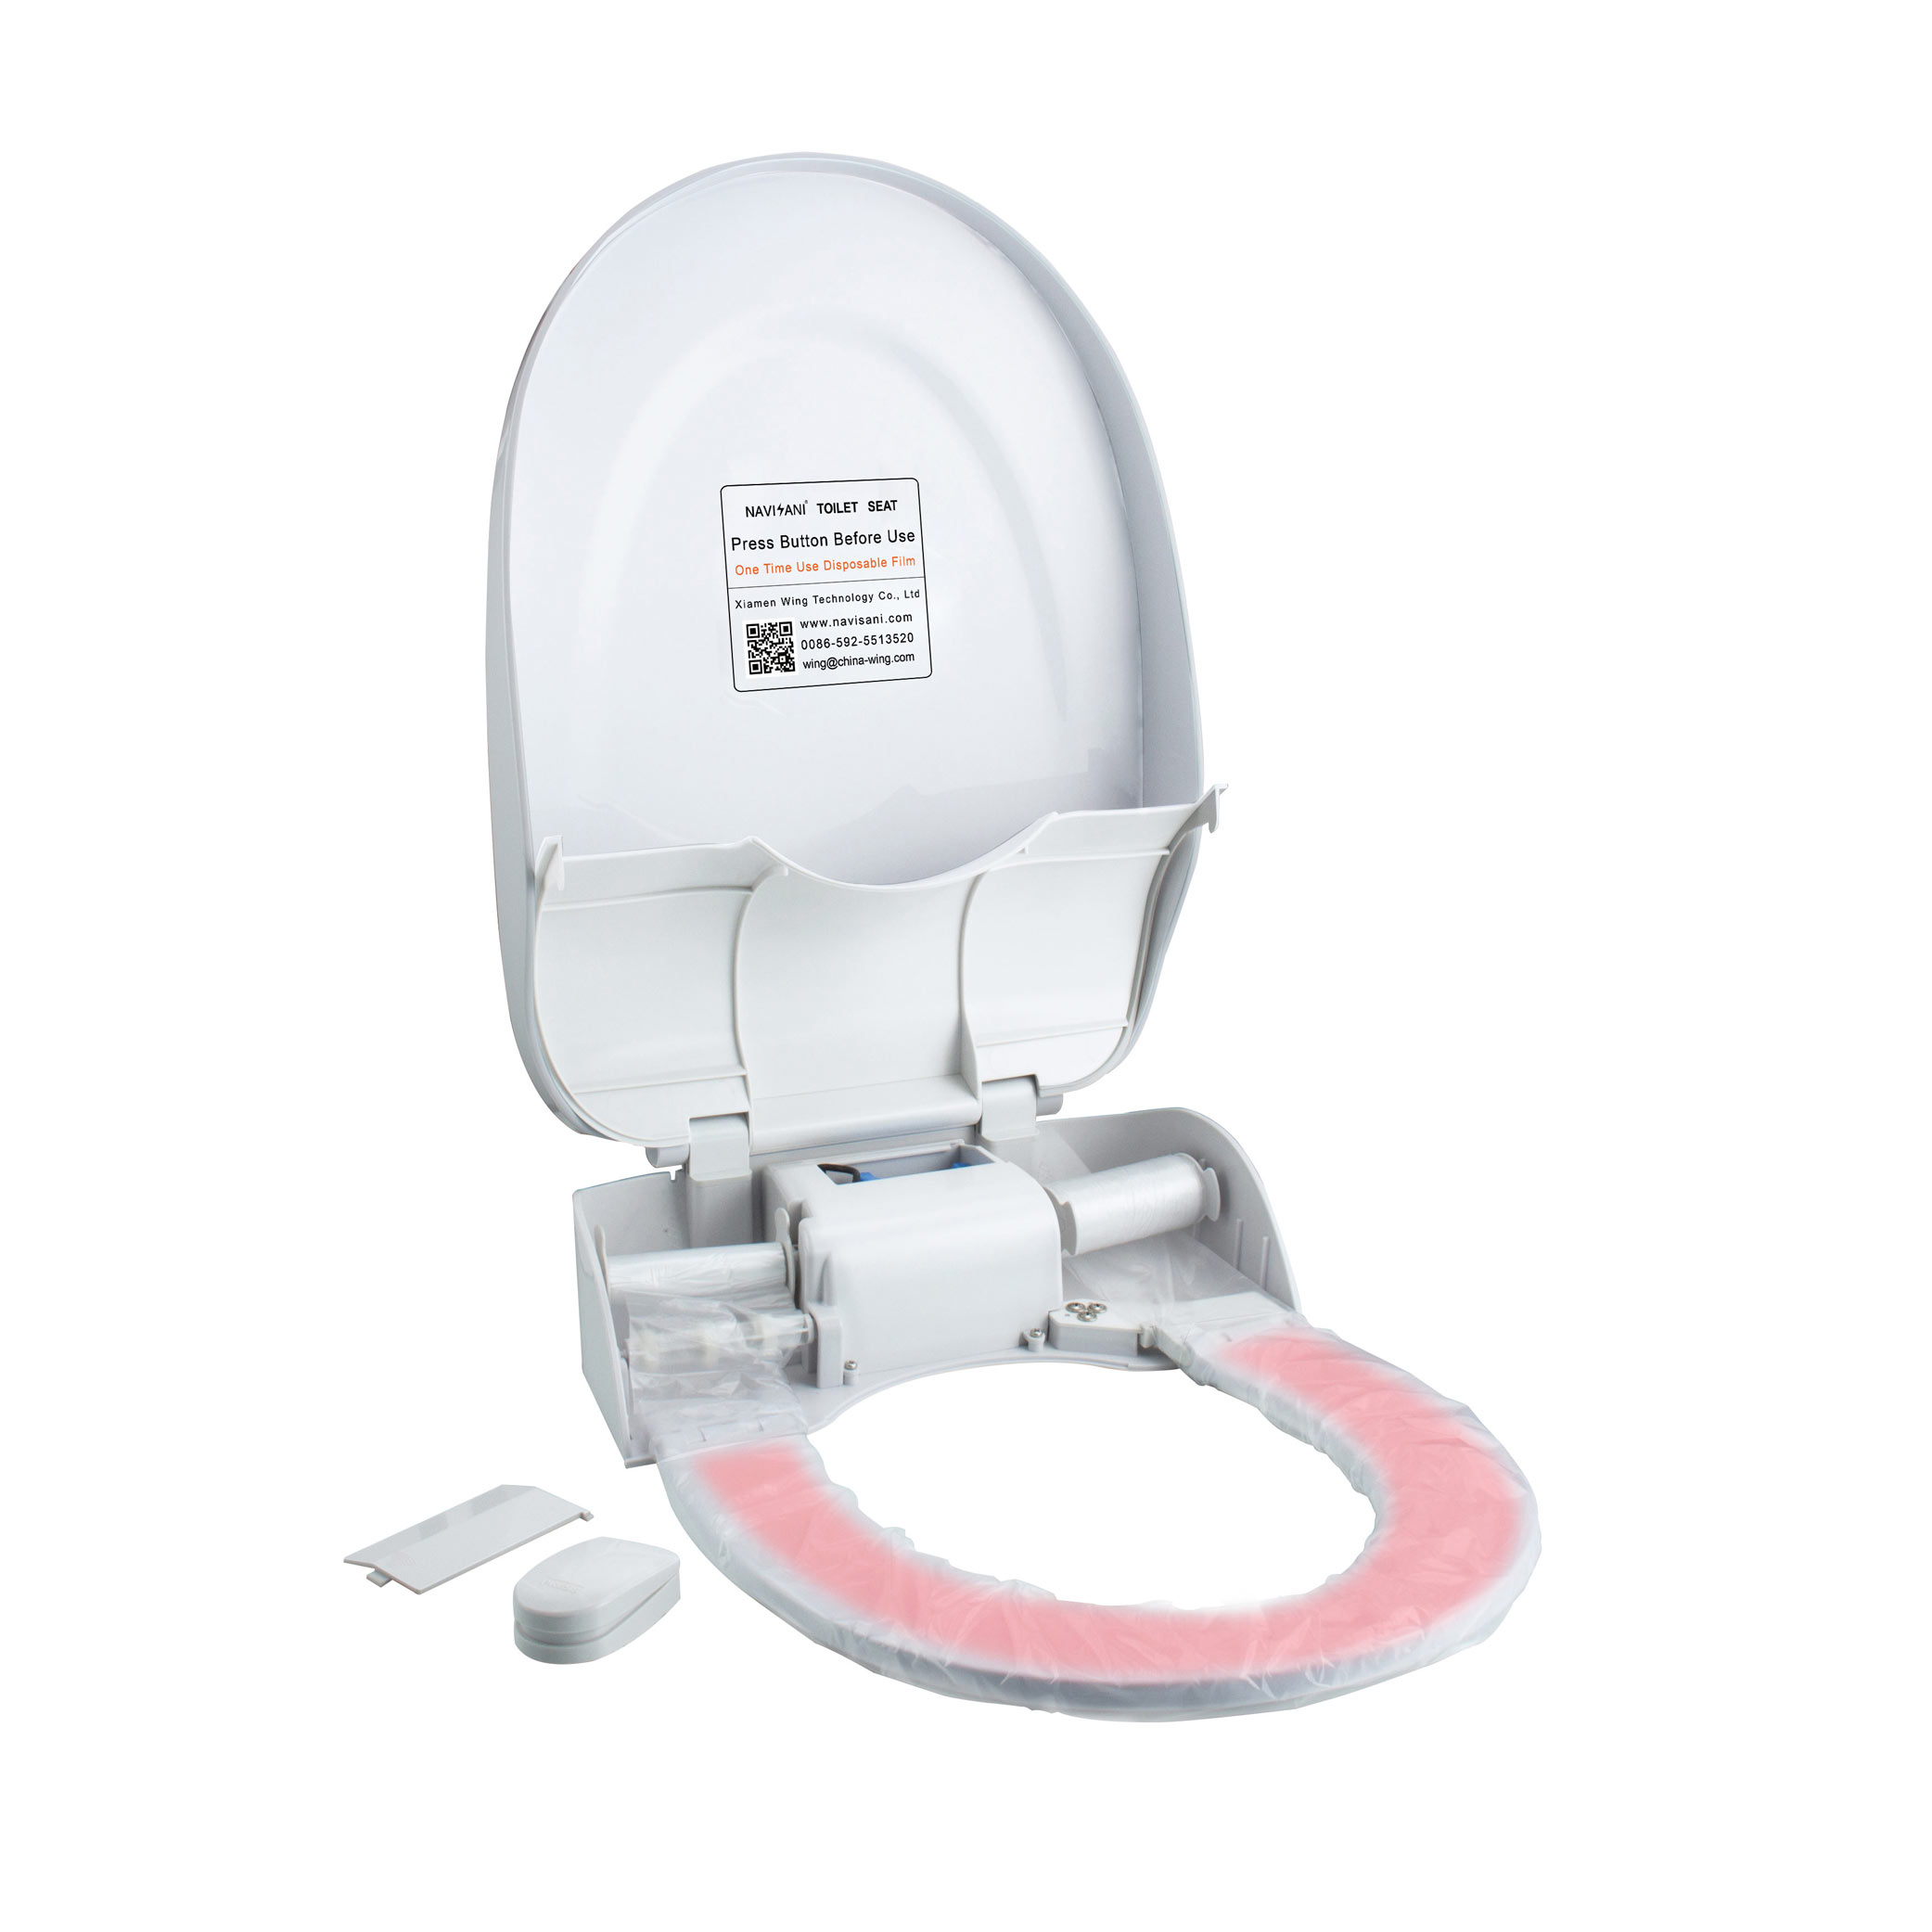 Sanitary Hygienic Disposable Auto Toilet Seat Covers